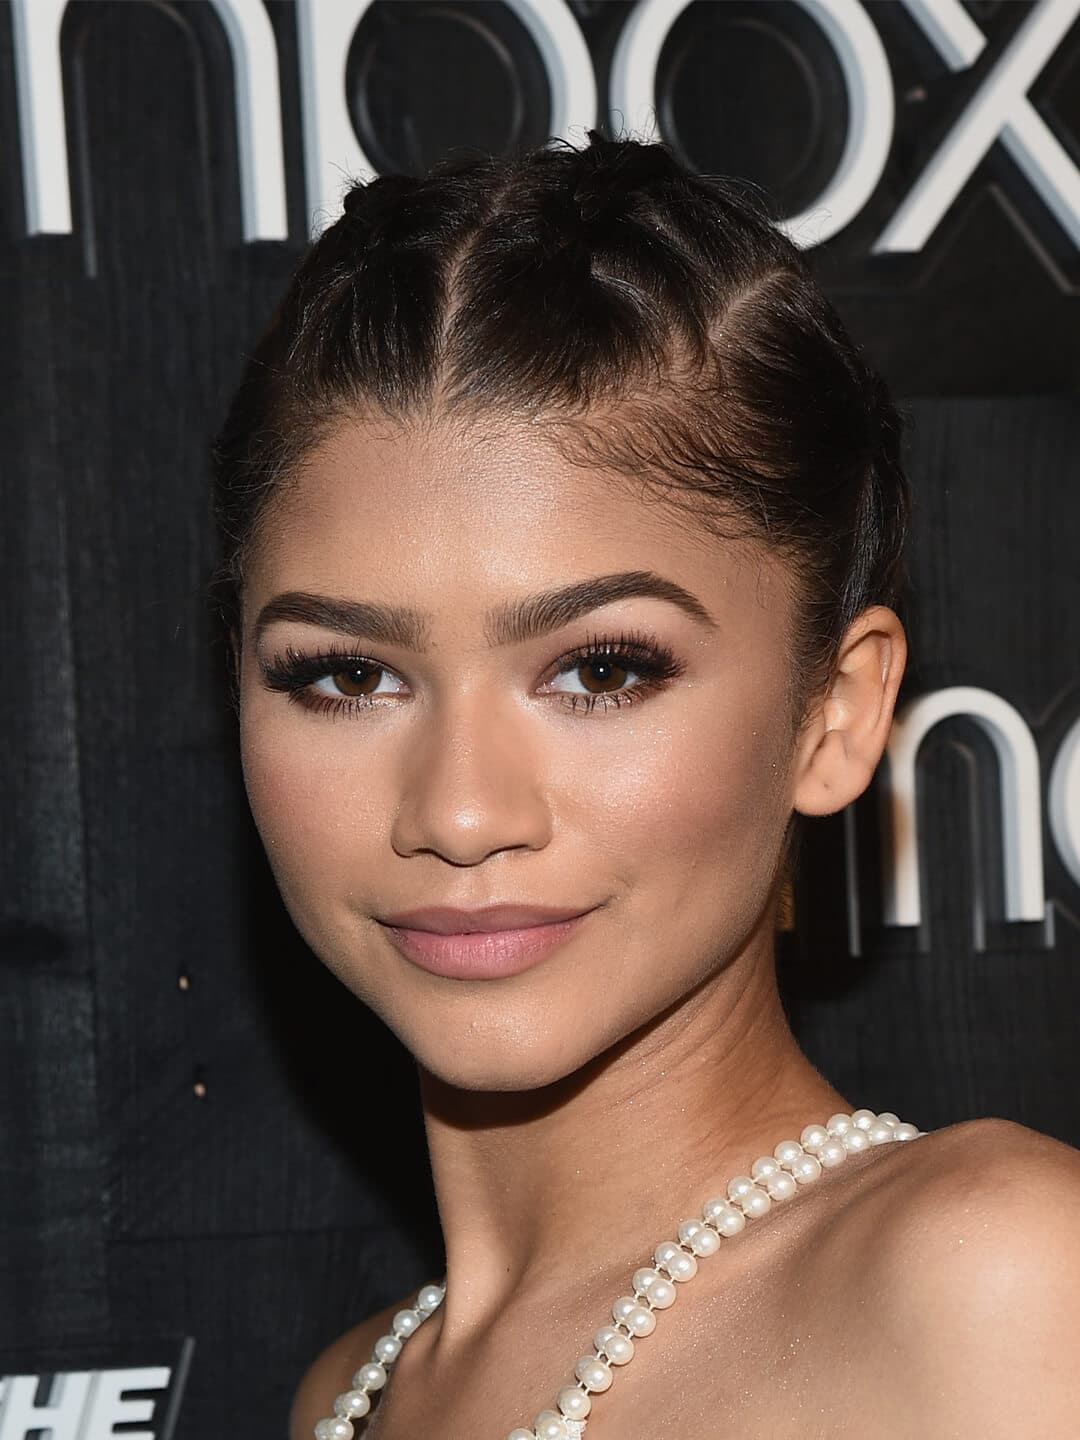 Close-up of Zendala looking glam in a braided updo hairstyle and sultry makeup